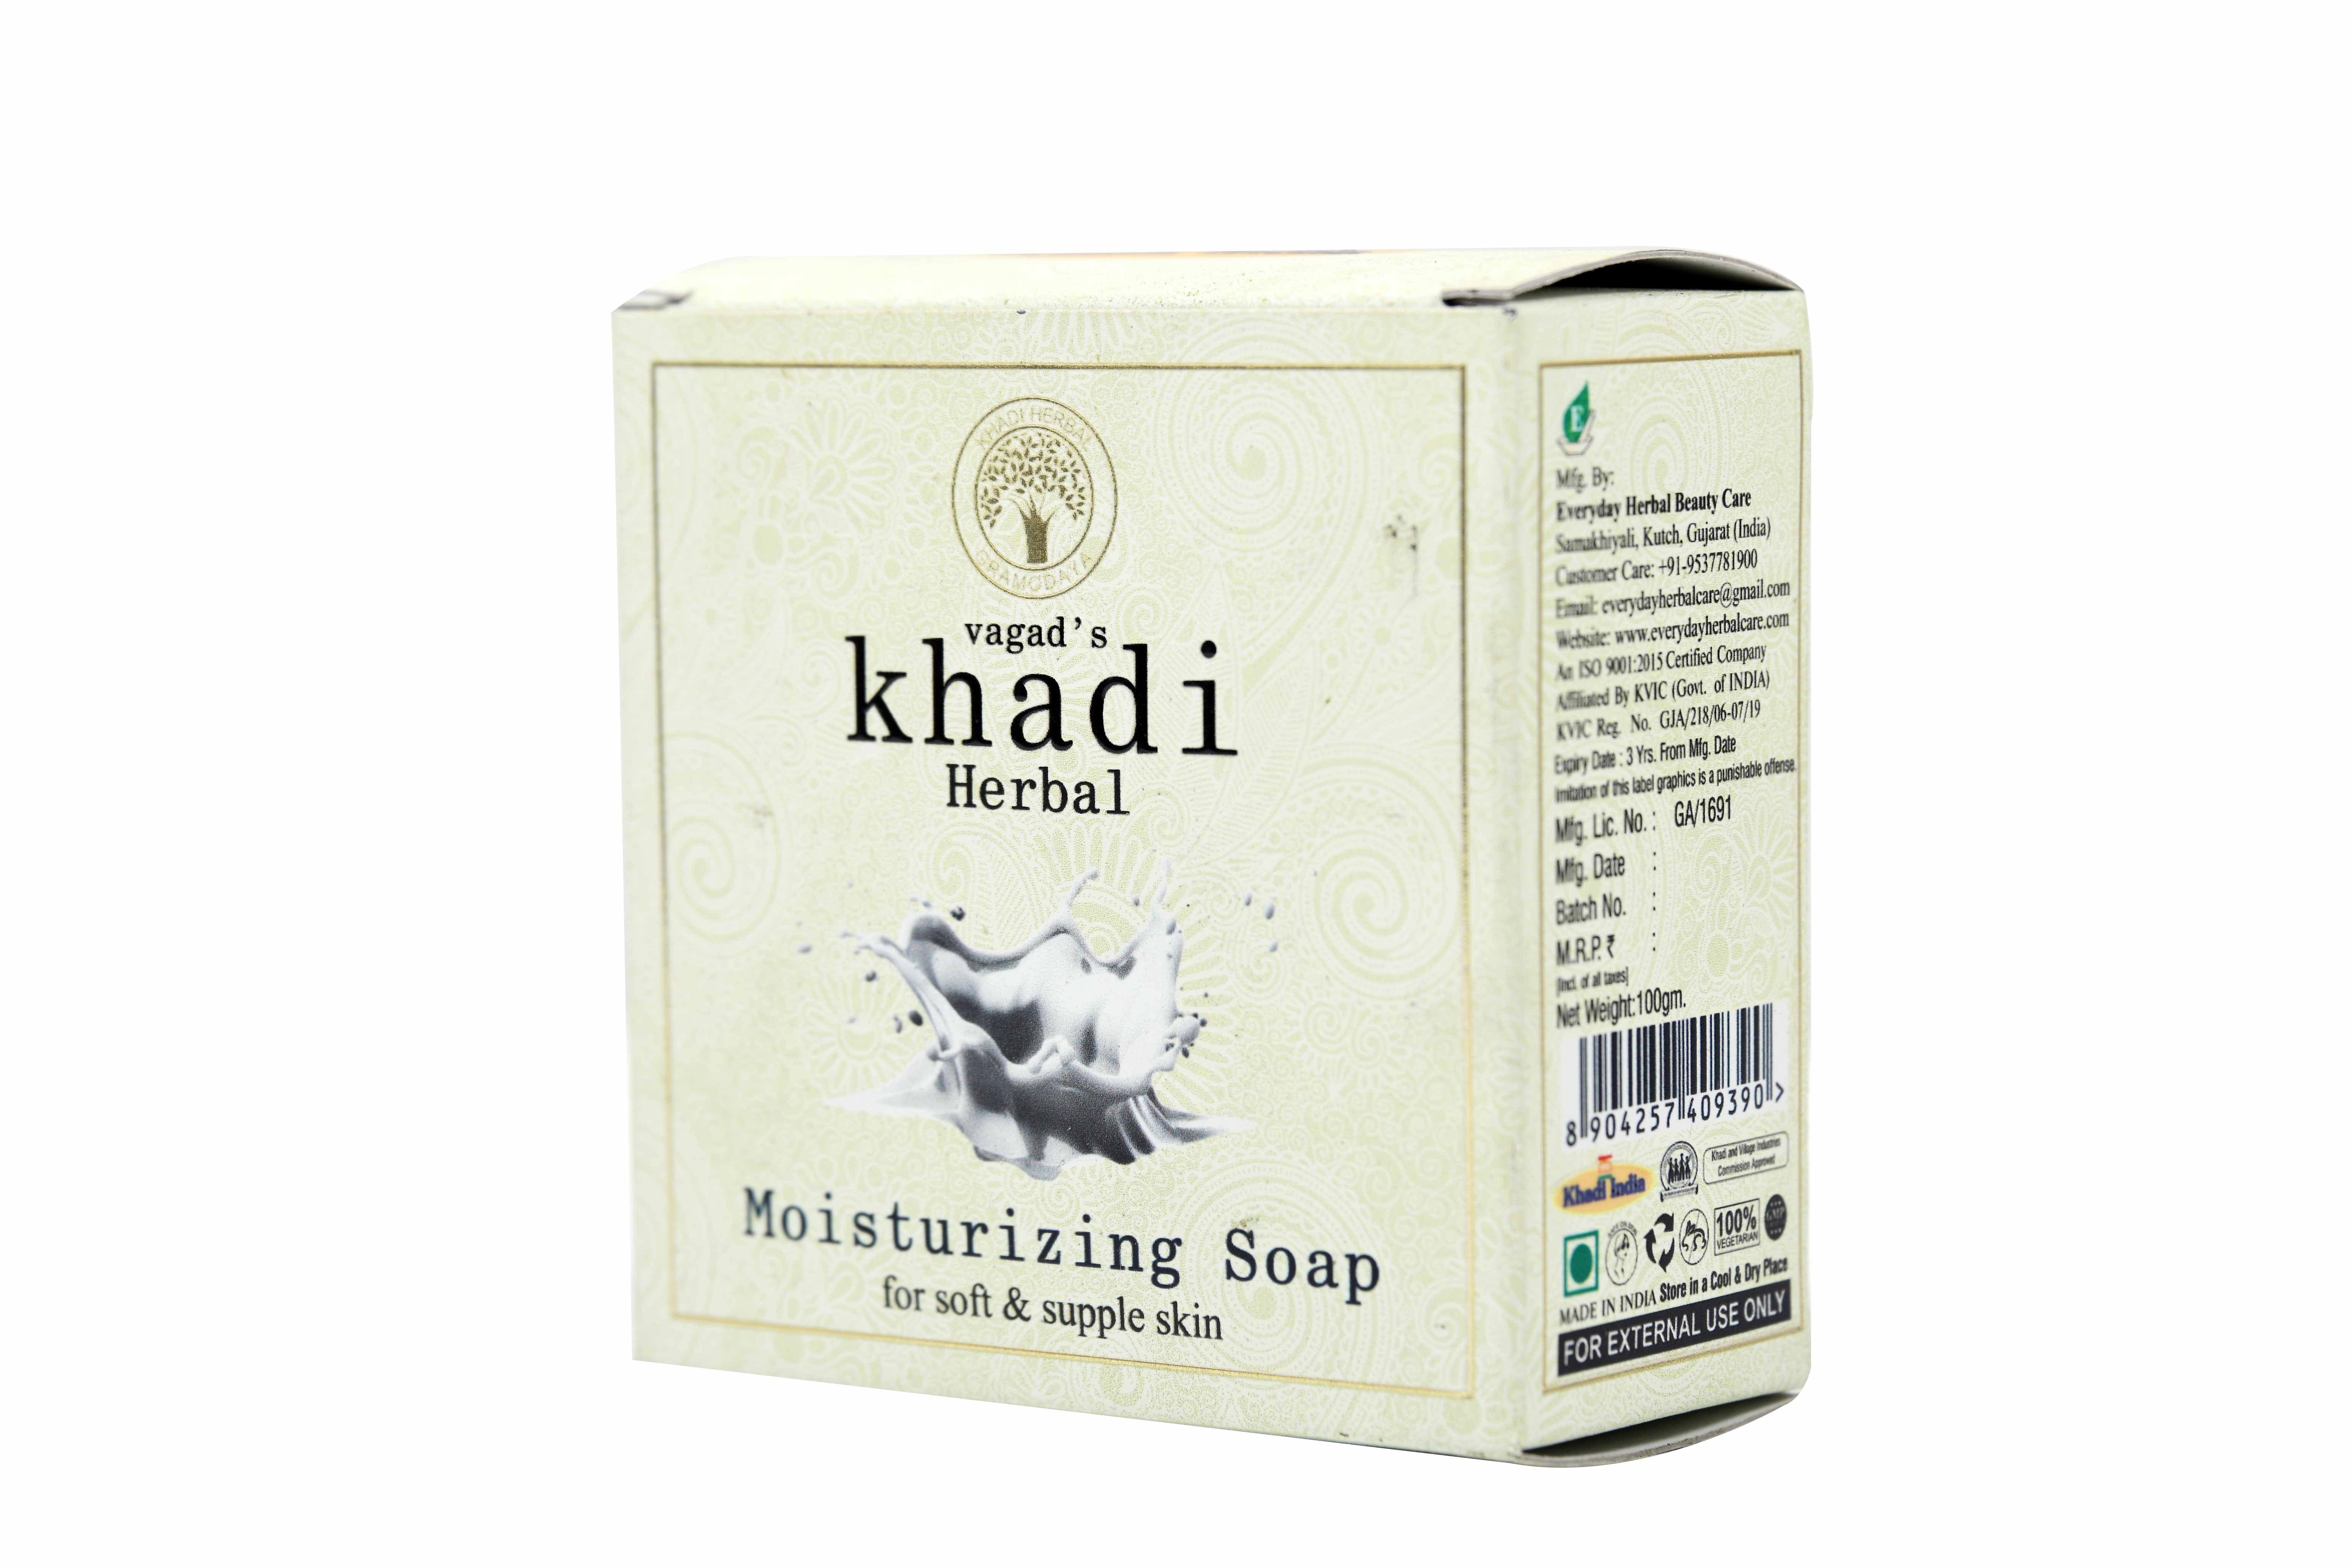 Buy Vagad's Khadi Moisturizing Milky Soap For Soft And Supple Skin at Best Price Online